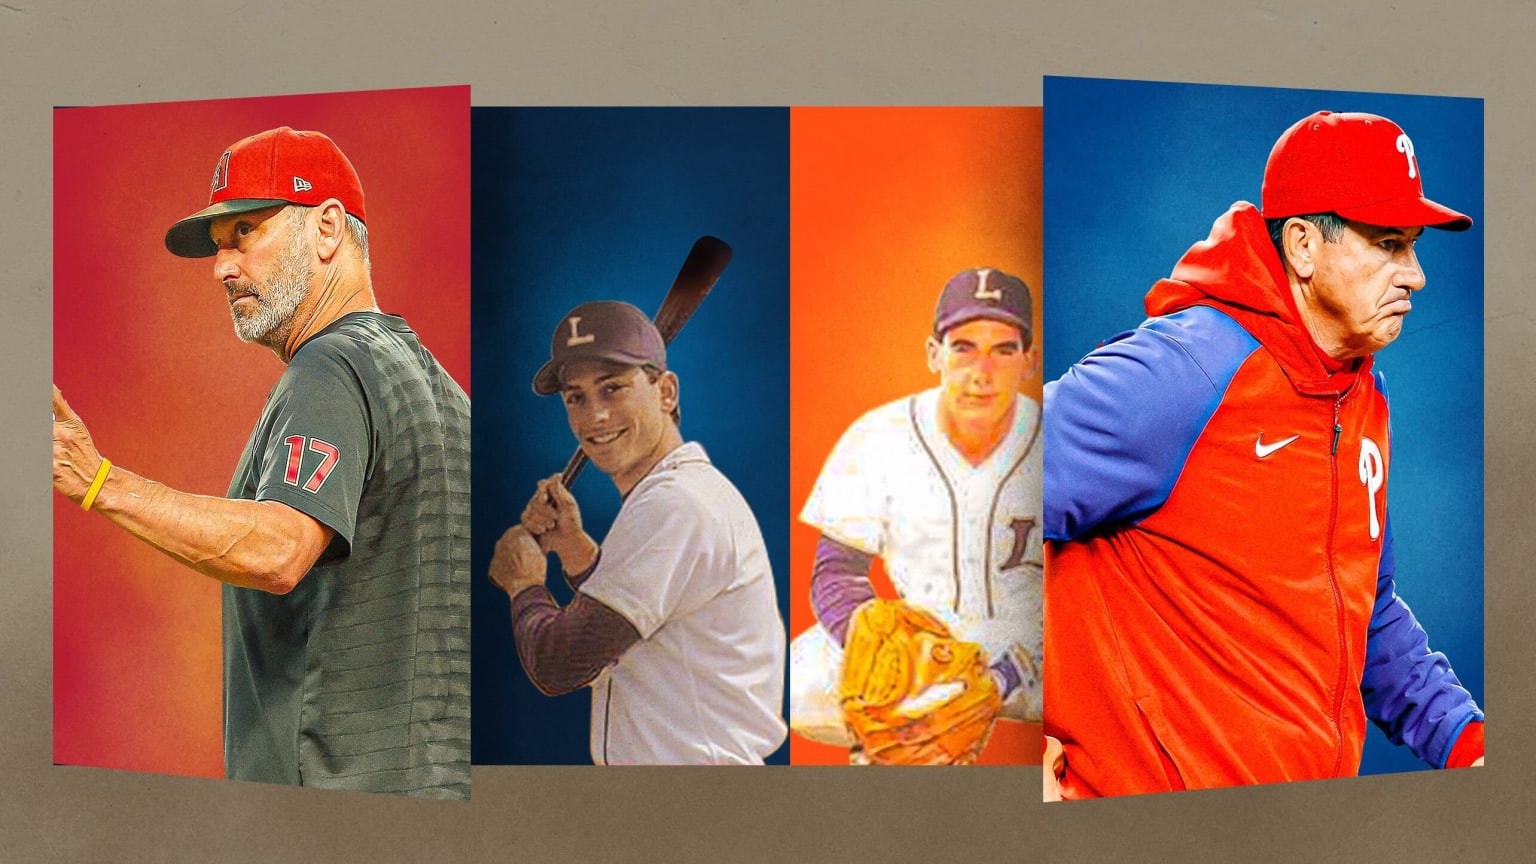 Images of Torey Lovullo and Rob Thomson alongside photos of them as Minor Leaguers